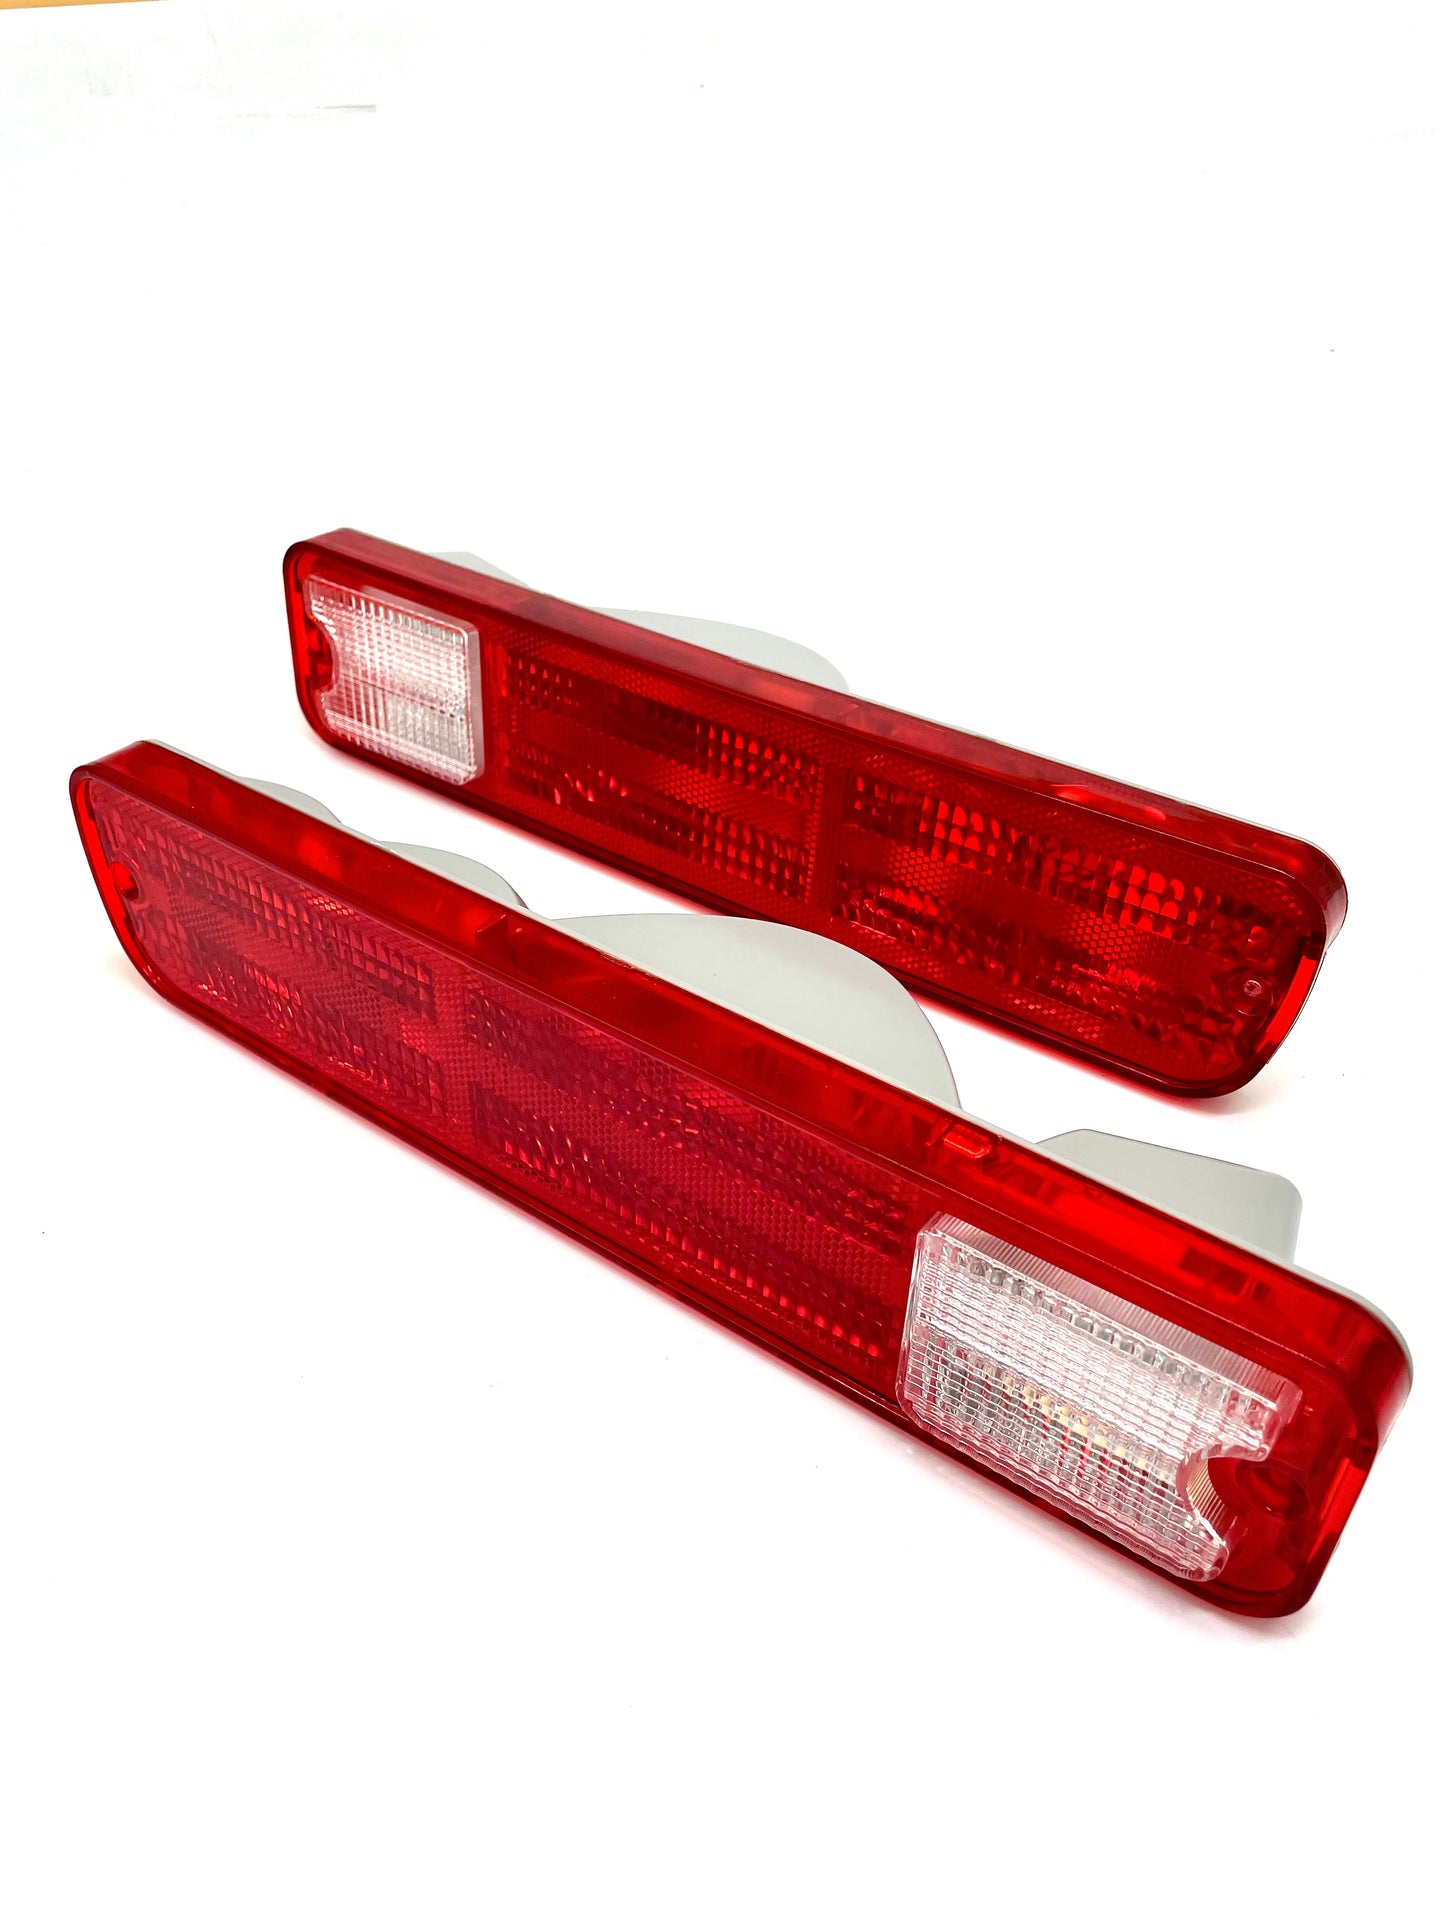 1979-1987 El Camino Tail Light Lens, Sold in pairs